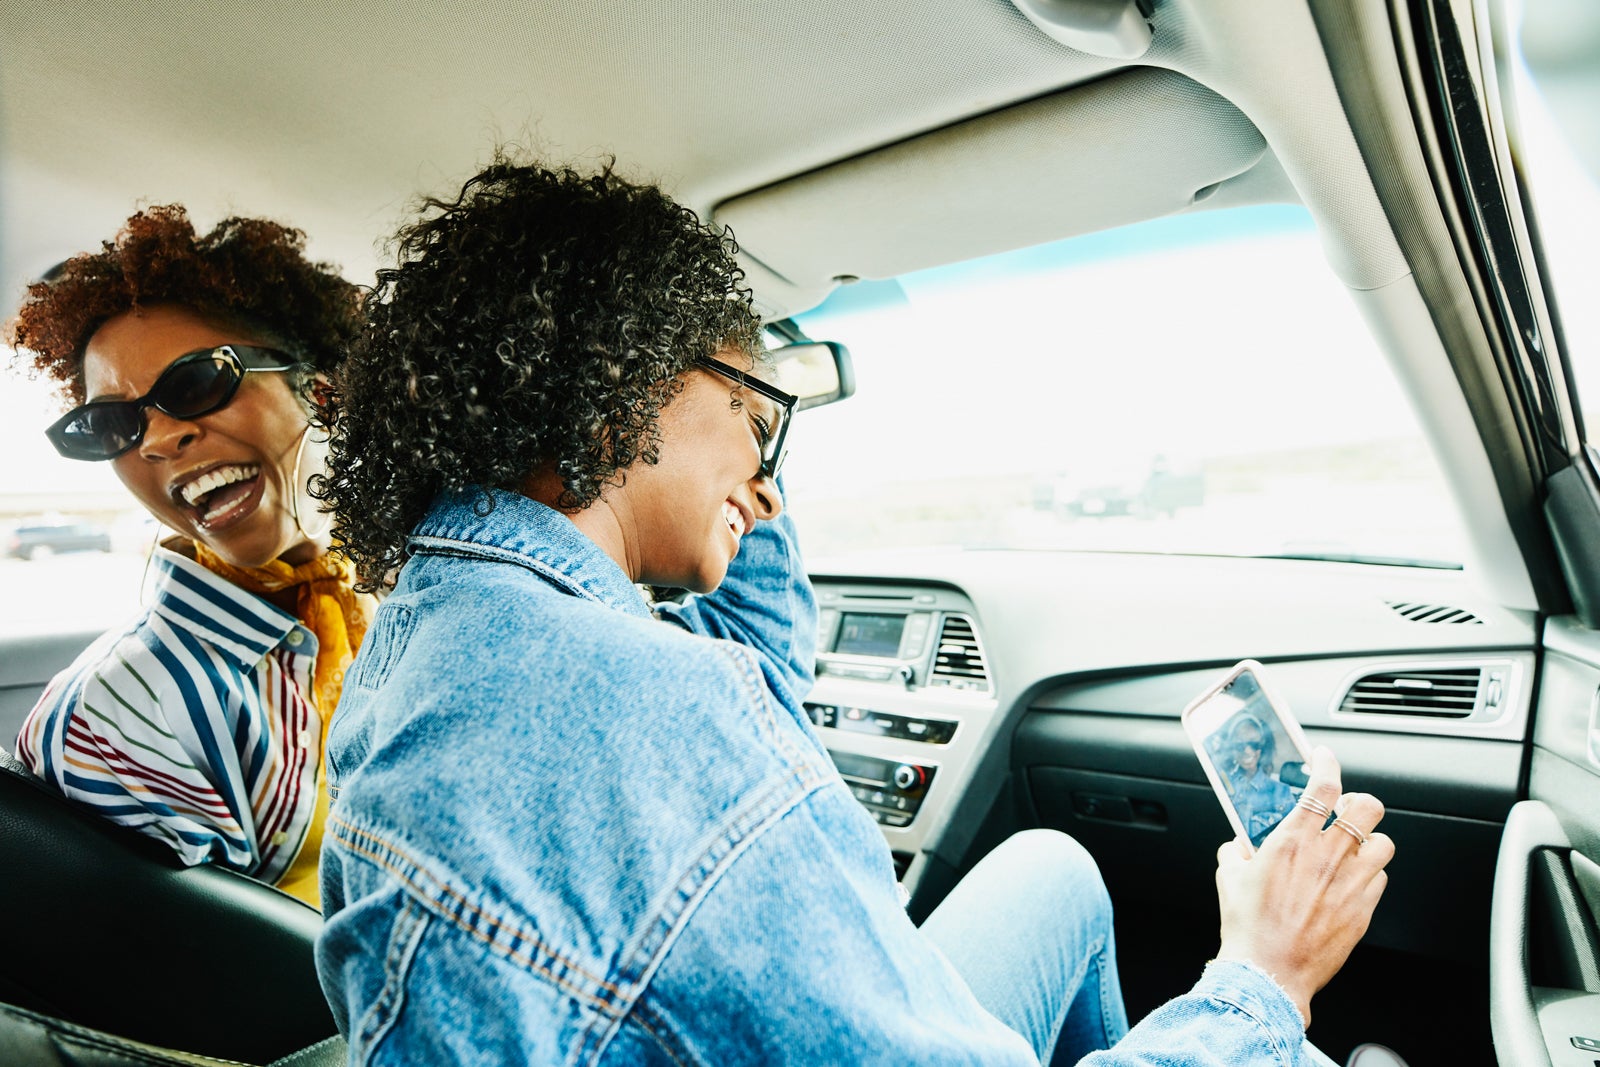 Smiling woman taking selfie with smart phone while sitting in passenger seat of car during road trip with friends